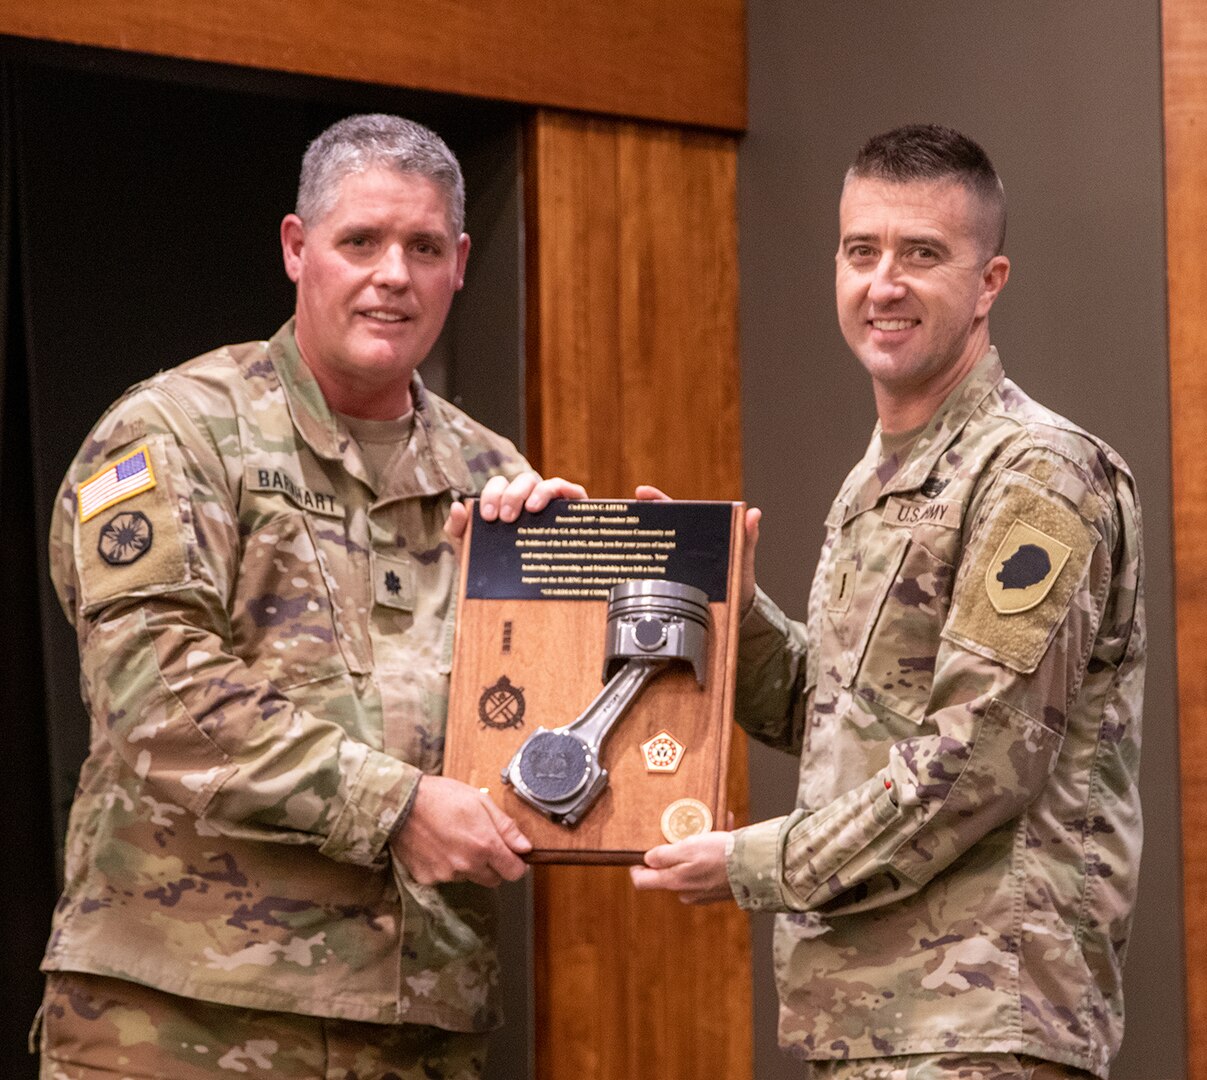 Lt. Col. Timothy Barnhart, Surface Maintenance Manager, Illinois Army National Guard, presents Chief Warrant Officer 4 Ryan Little with a plaque commemorating Little’s career in the ILARNG, during a ceremony Dec. 21 at the Illinois Military Academy, Camp Lincoln, Springfield, Illinois. Little retired after 26 years of service in the Illinois Army National Guard.